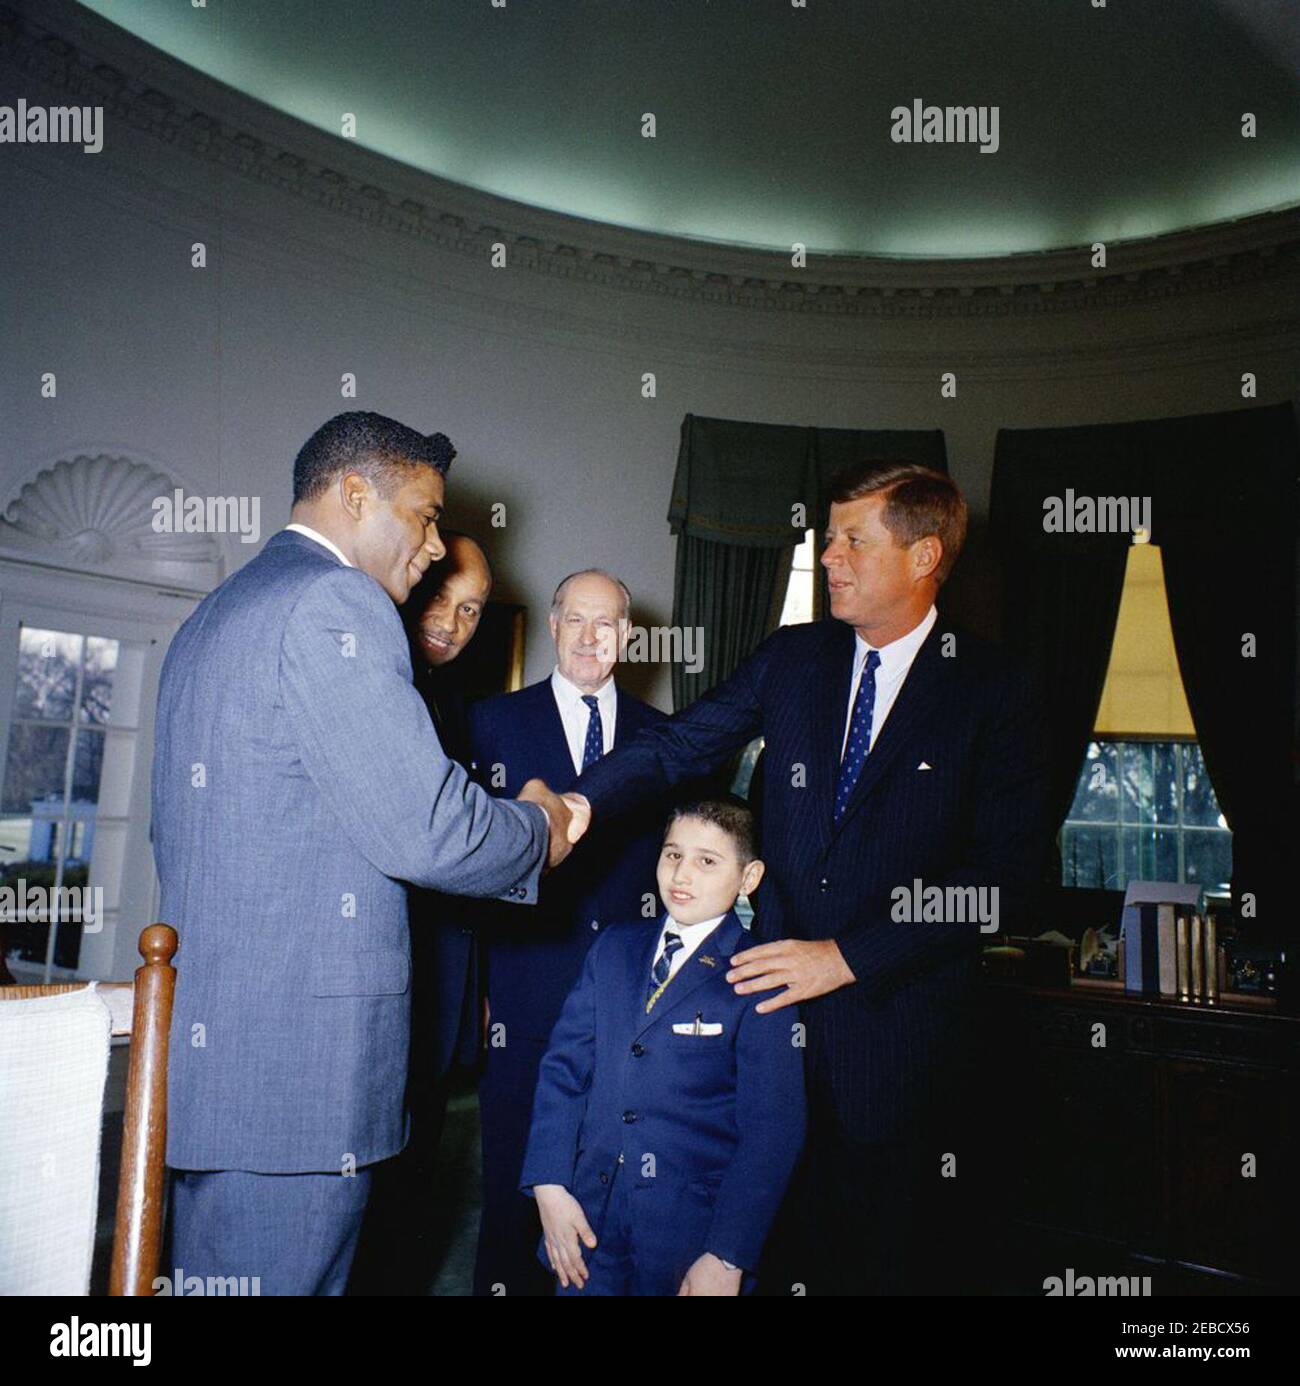 Visit of members of the Big Brothers Association, including Heavyweight Boxing Champion Floyd Patterson, 12:25PM. President John F. Kennedy greets representatives of the Big Brothers Association in connection with Big Brothers Week. The President shakes hands with world heavyweight boxing champion Floyd Patterson, who visited Washington in connection with Big Brothers Week. Looking on are (L-R) John Duncan, member of the District of Columbia Board of Commissioners; journalist Drew Pearson; and ten-year-old Freddie Cicala, a u201clittle brotheru201d member of the Big Brothers organization. Ov Stock Photo